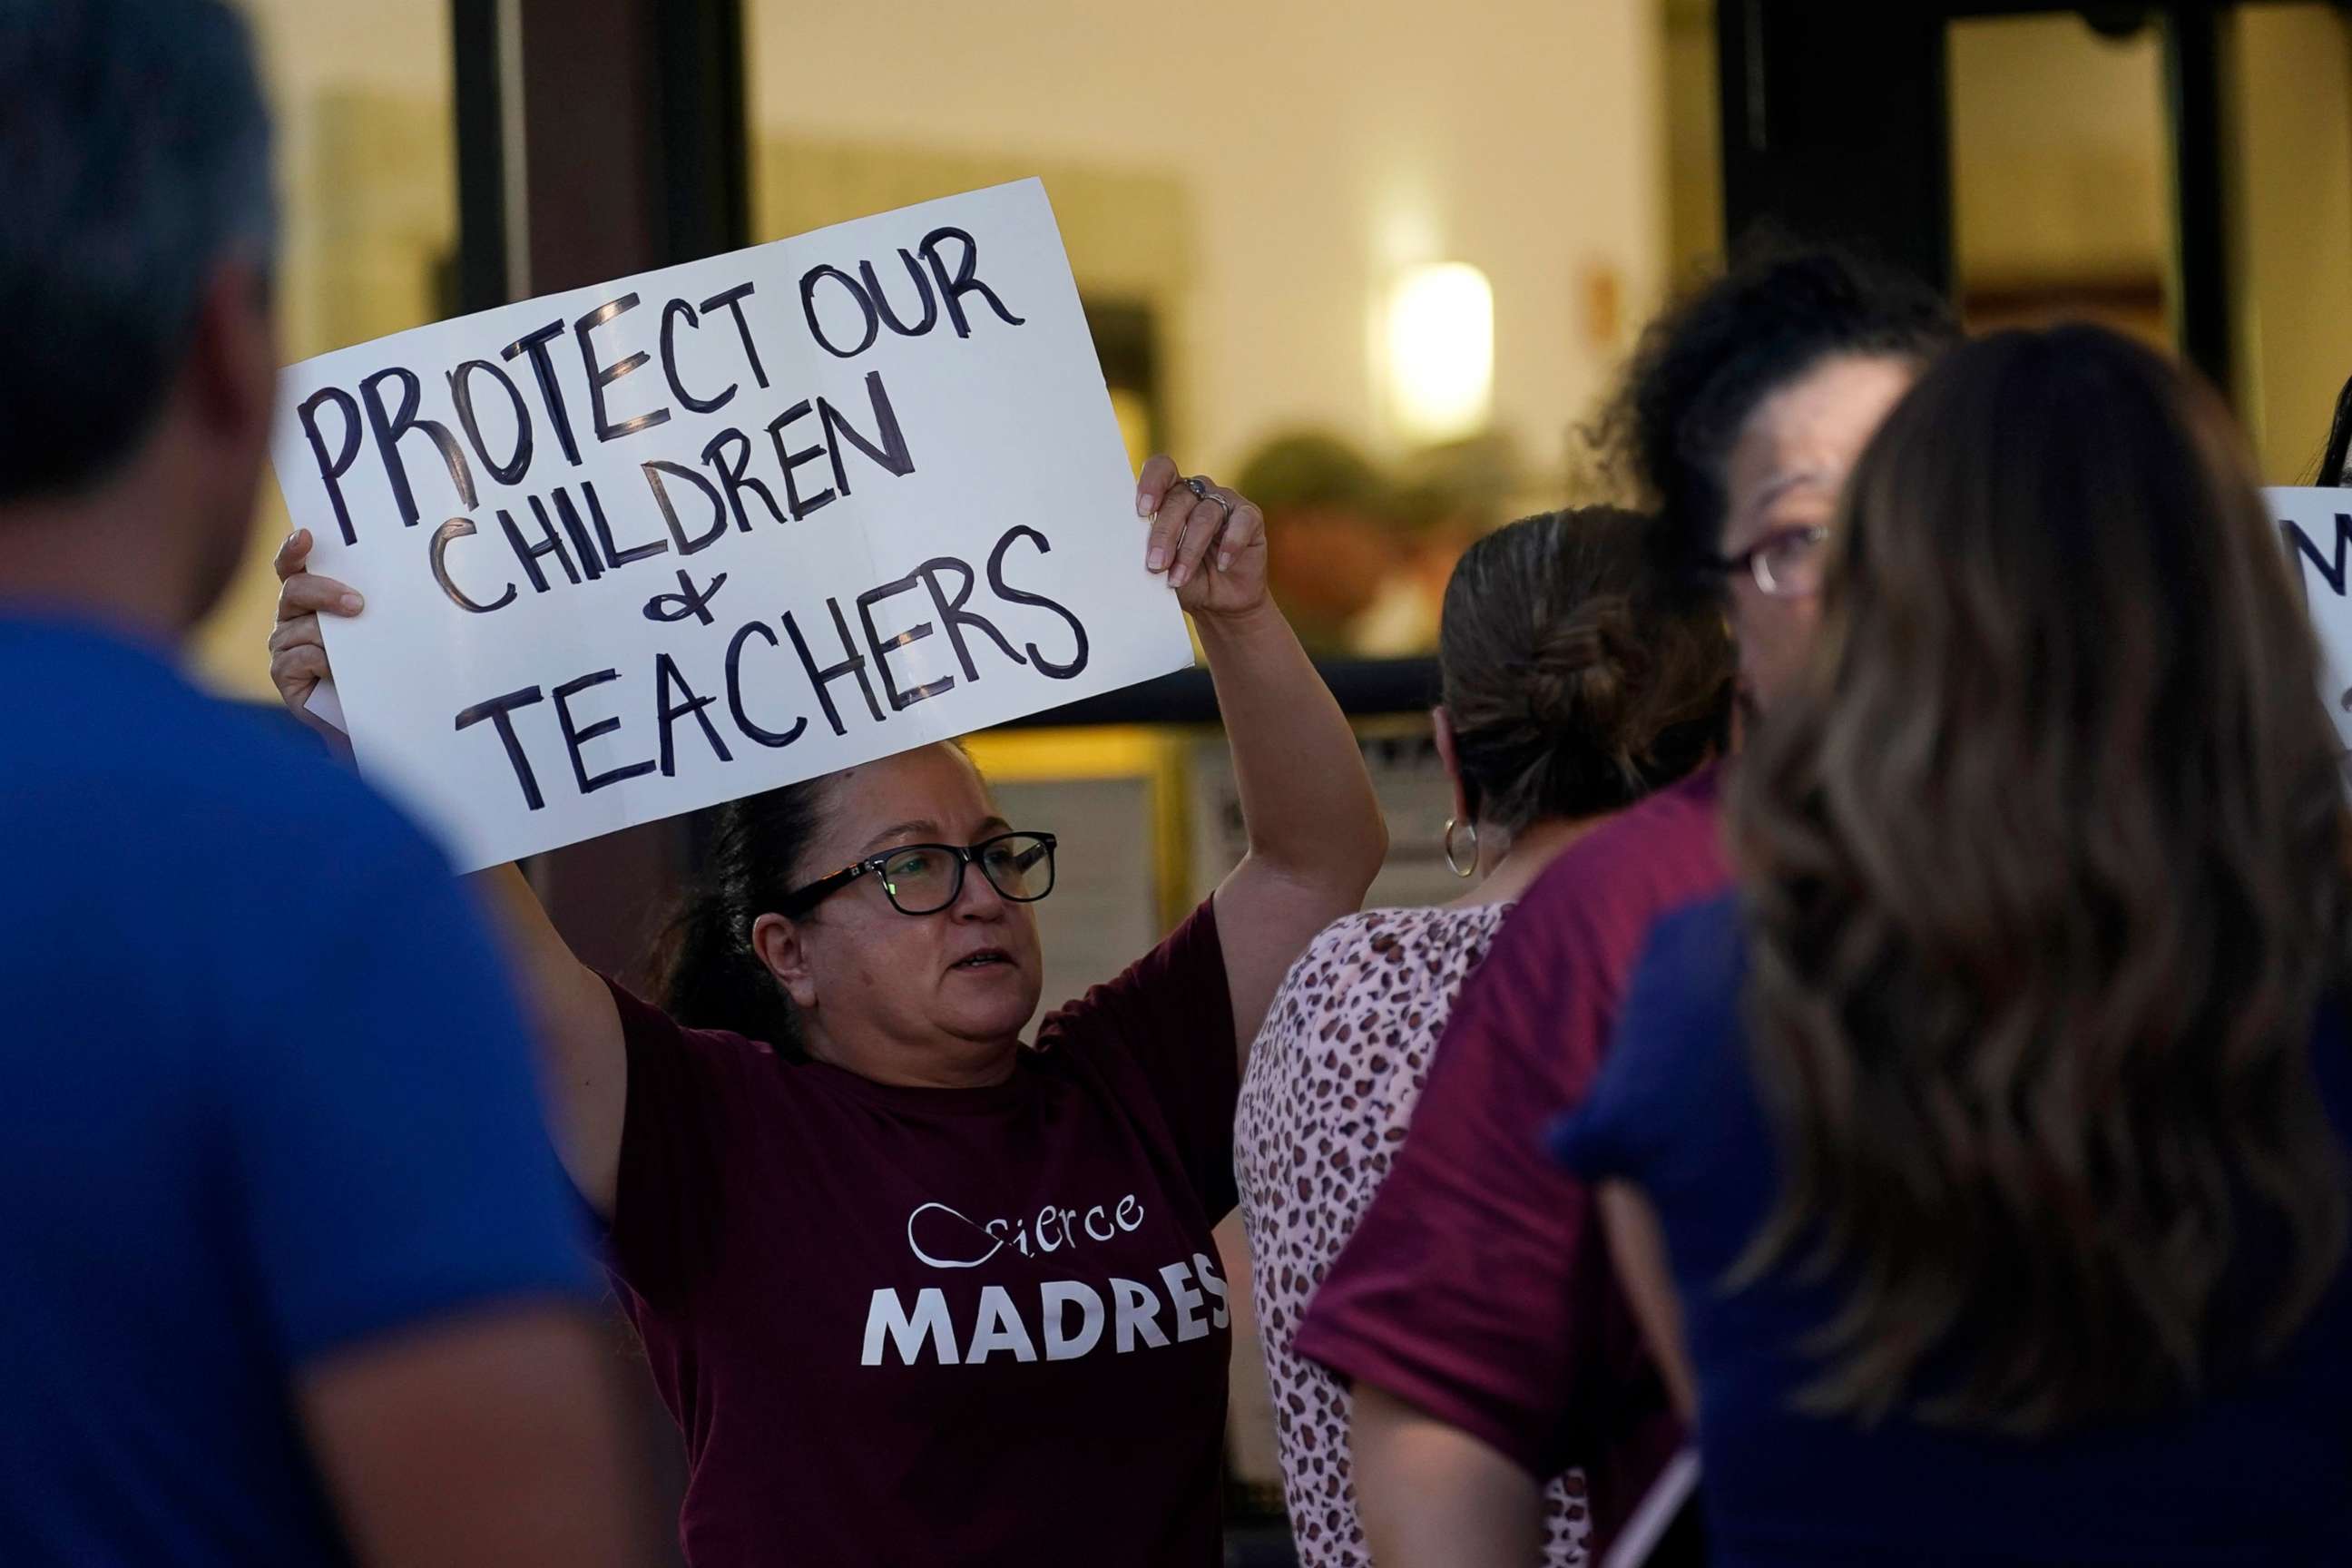 PHOTO: Parents and family of students hold signs including one reading "Protect our children & teachers" during a special meeting of the Board of Trustees of Uvalde Consolidated Independent School District, July 18, 2022, in Uvalde, Texas.